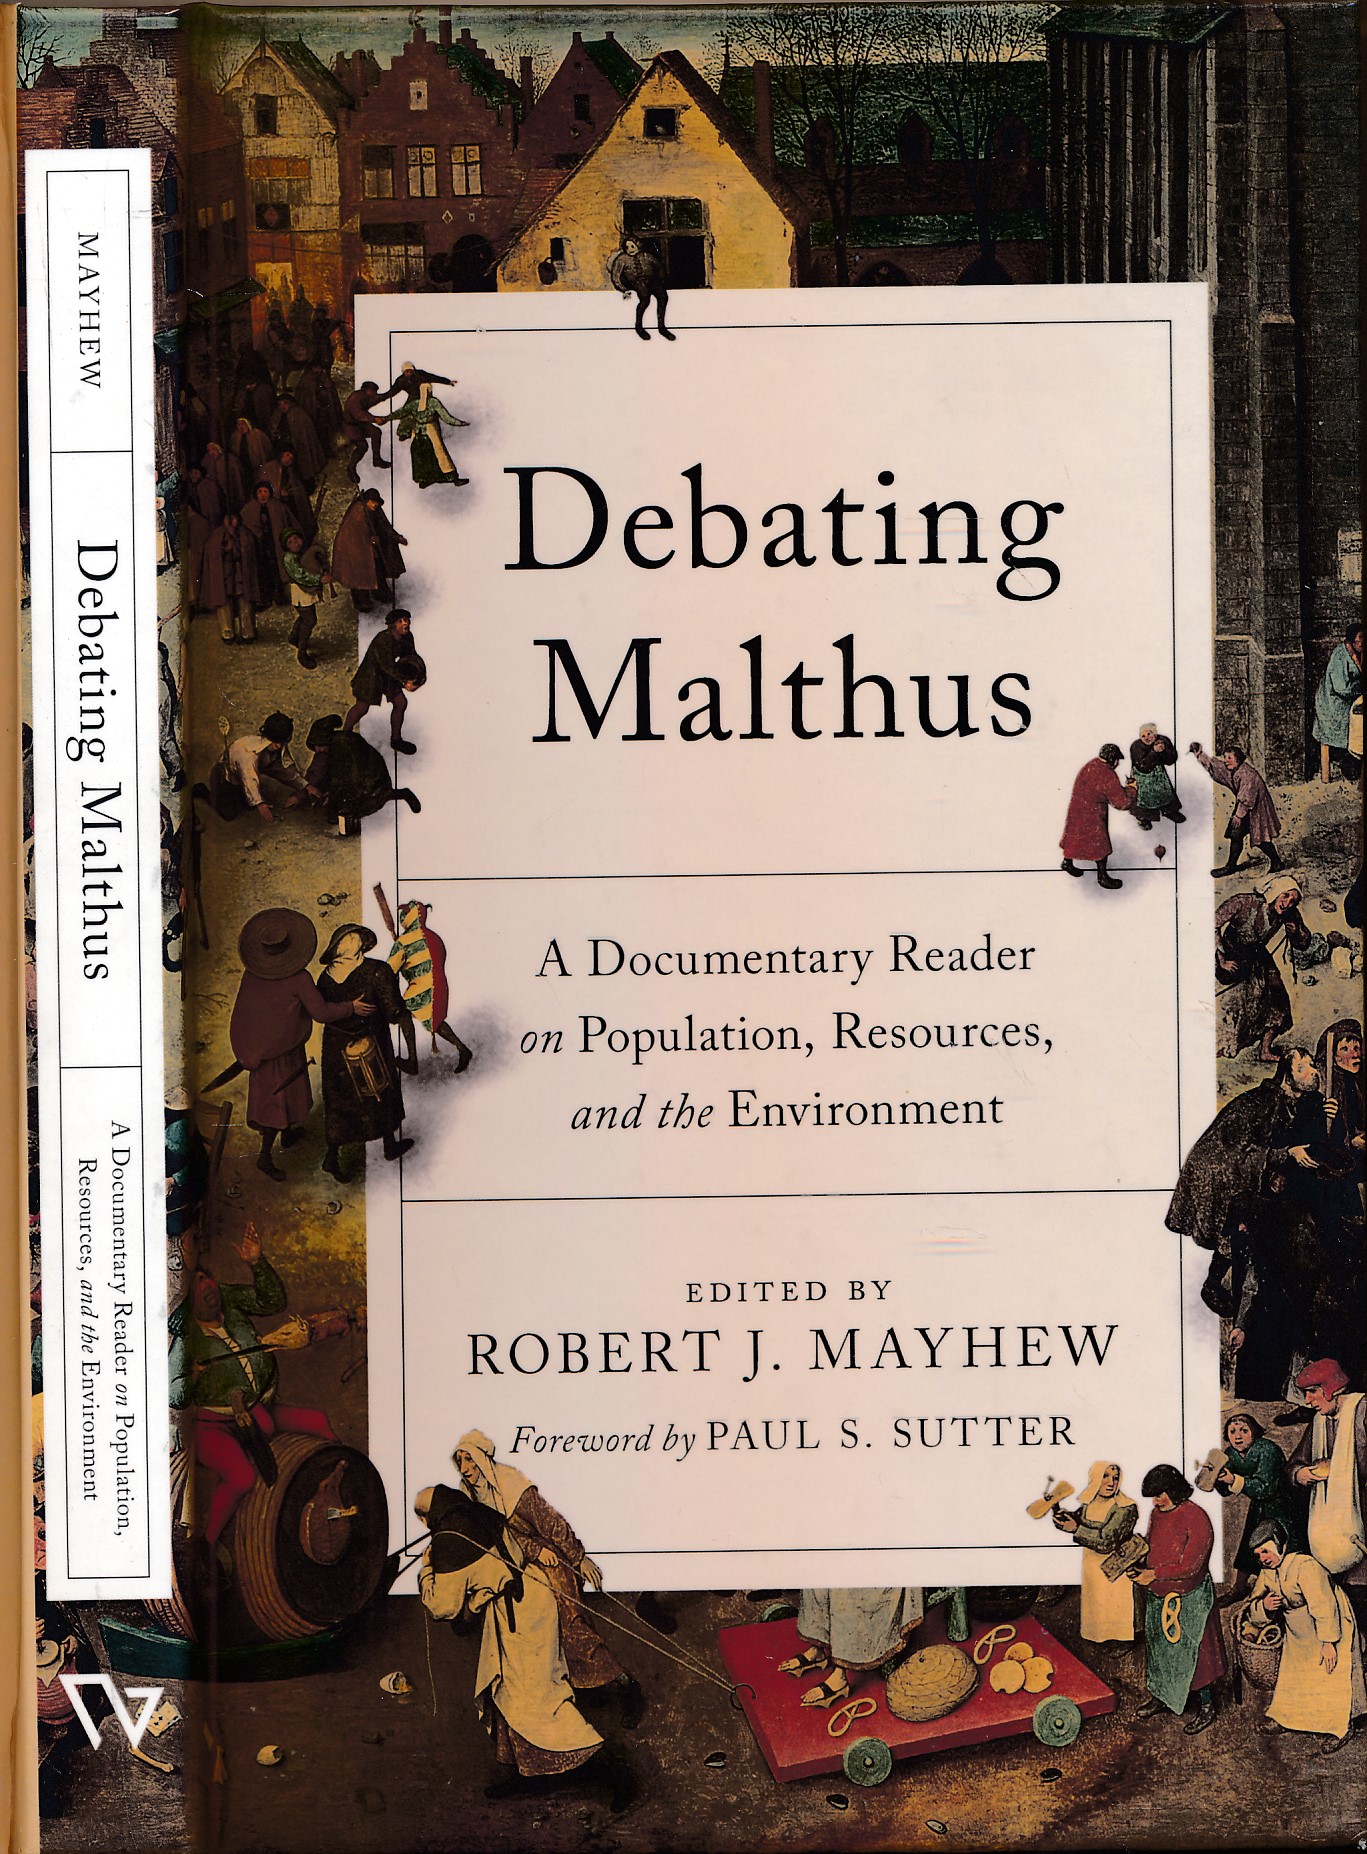 Debating Malthus. A Documentary Reader on Population, Resources and the Environment.